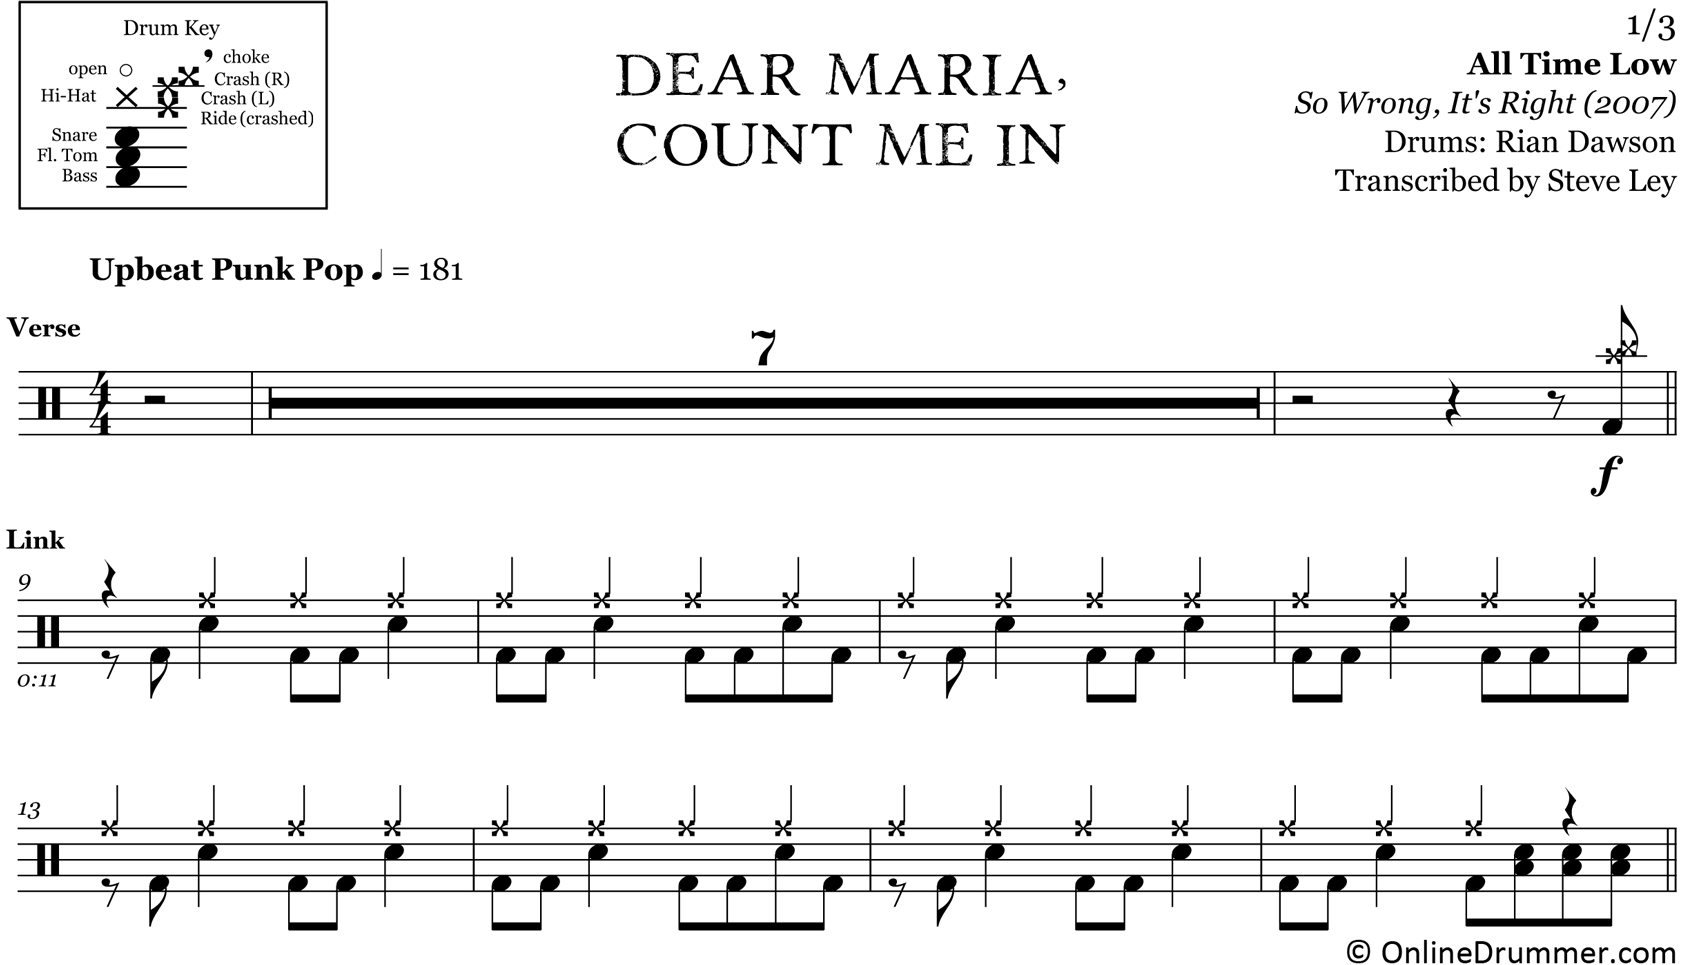 Dear Maria, Count Me In - All Time Low - Drum Sheet Music